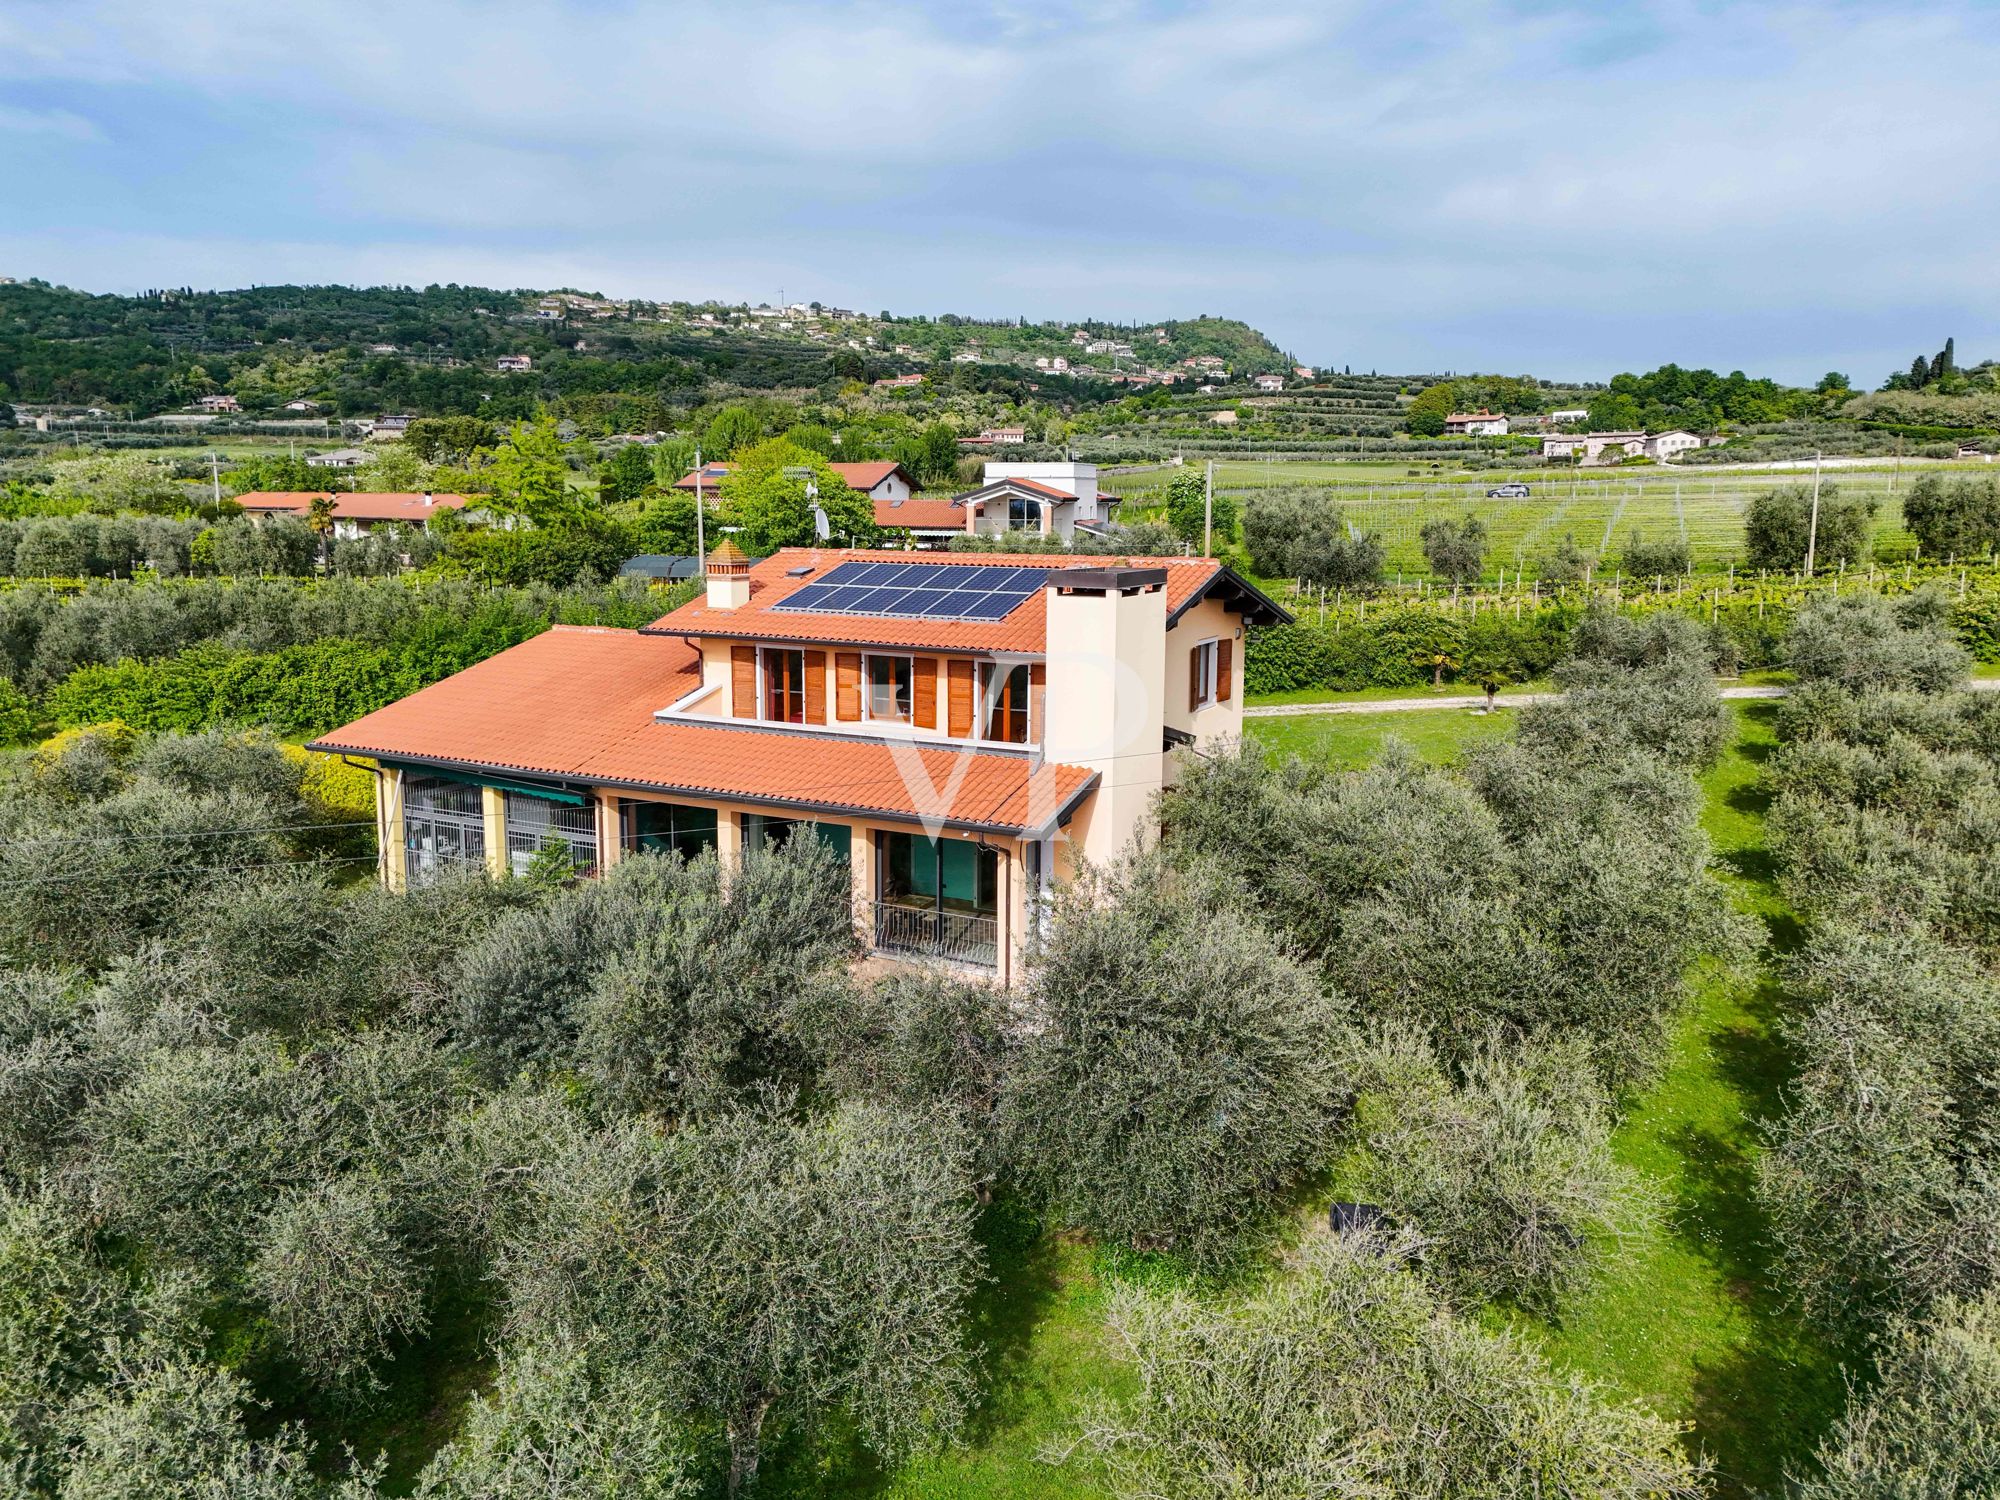 Vacation home, Agriturismo, riding arena and B&B nestled in 3 hectares of olive grove